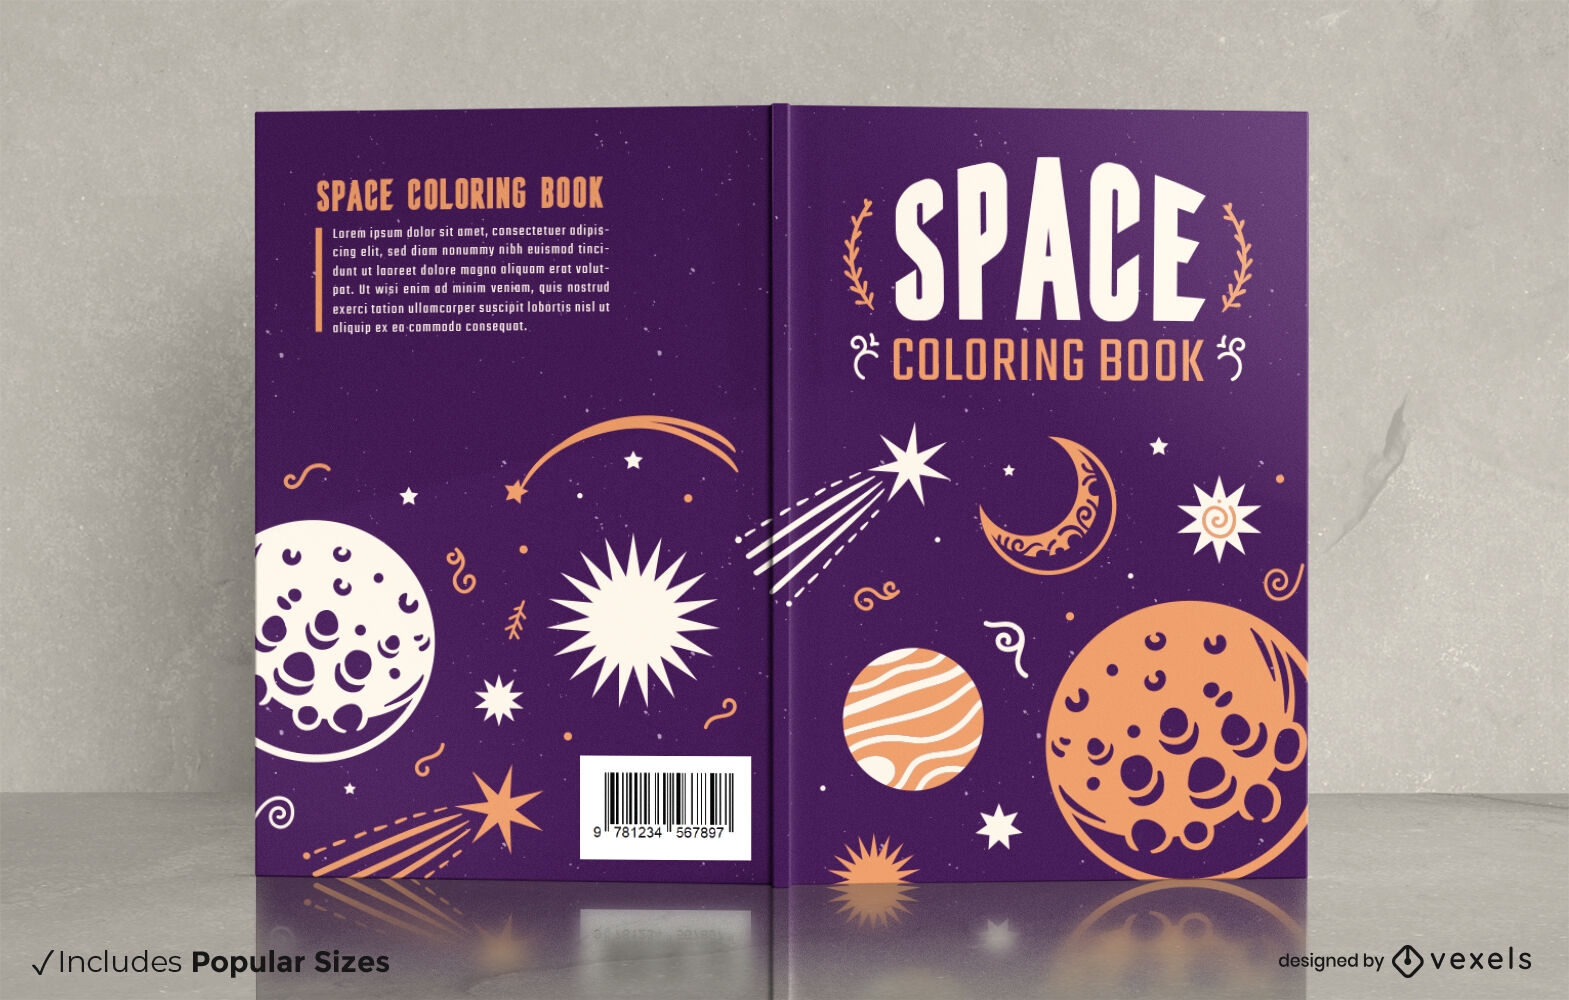 Space astronomy coloring book cover design